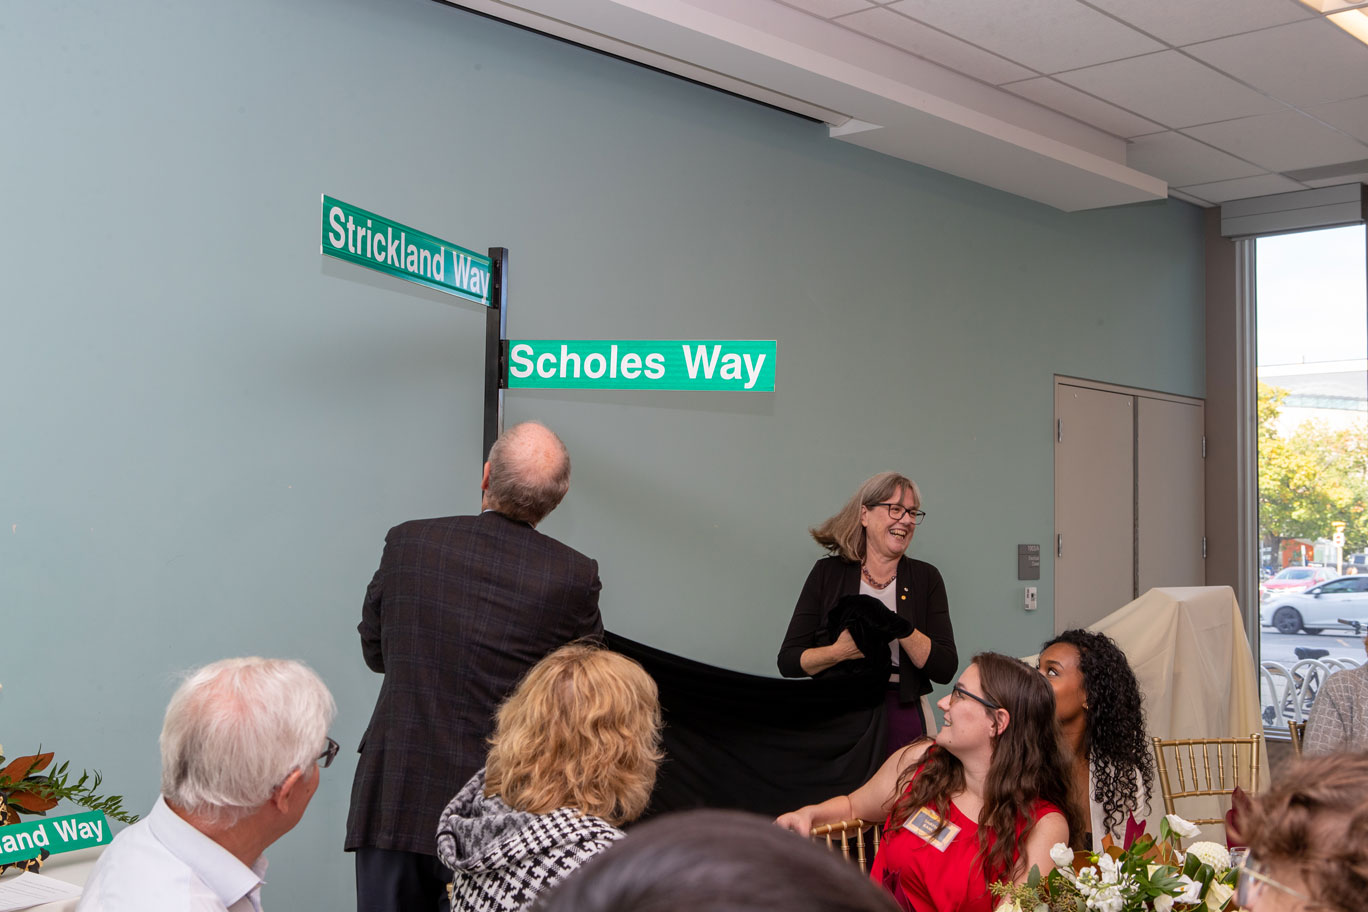 Donna Strickland and David Farrar pull off a cloth revealing the Strickland and Scholes Way street signs